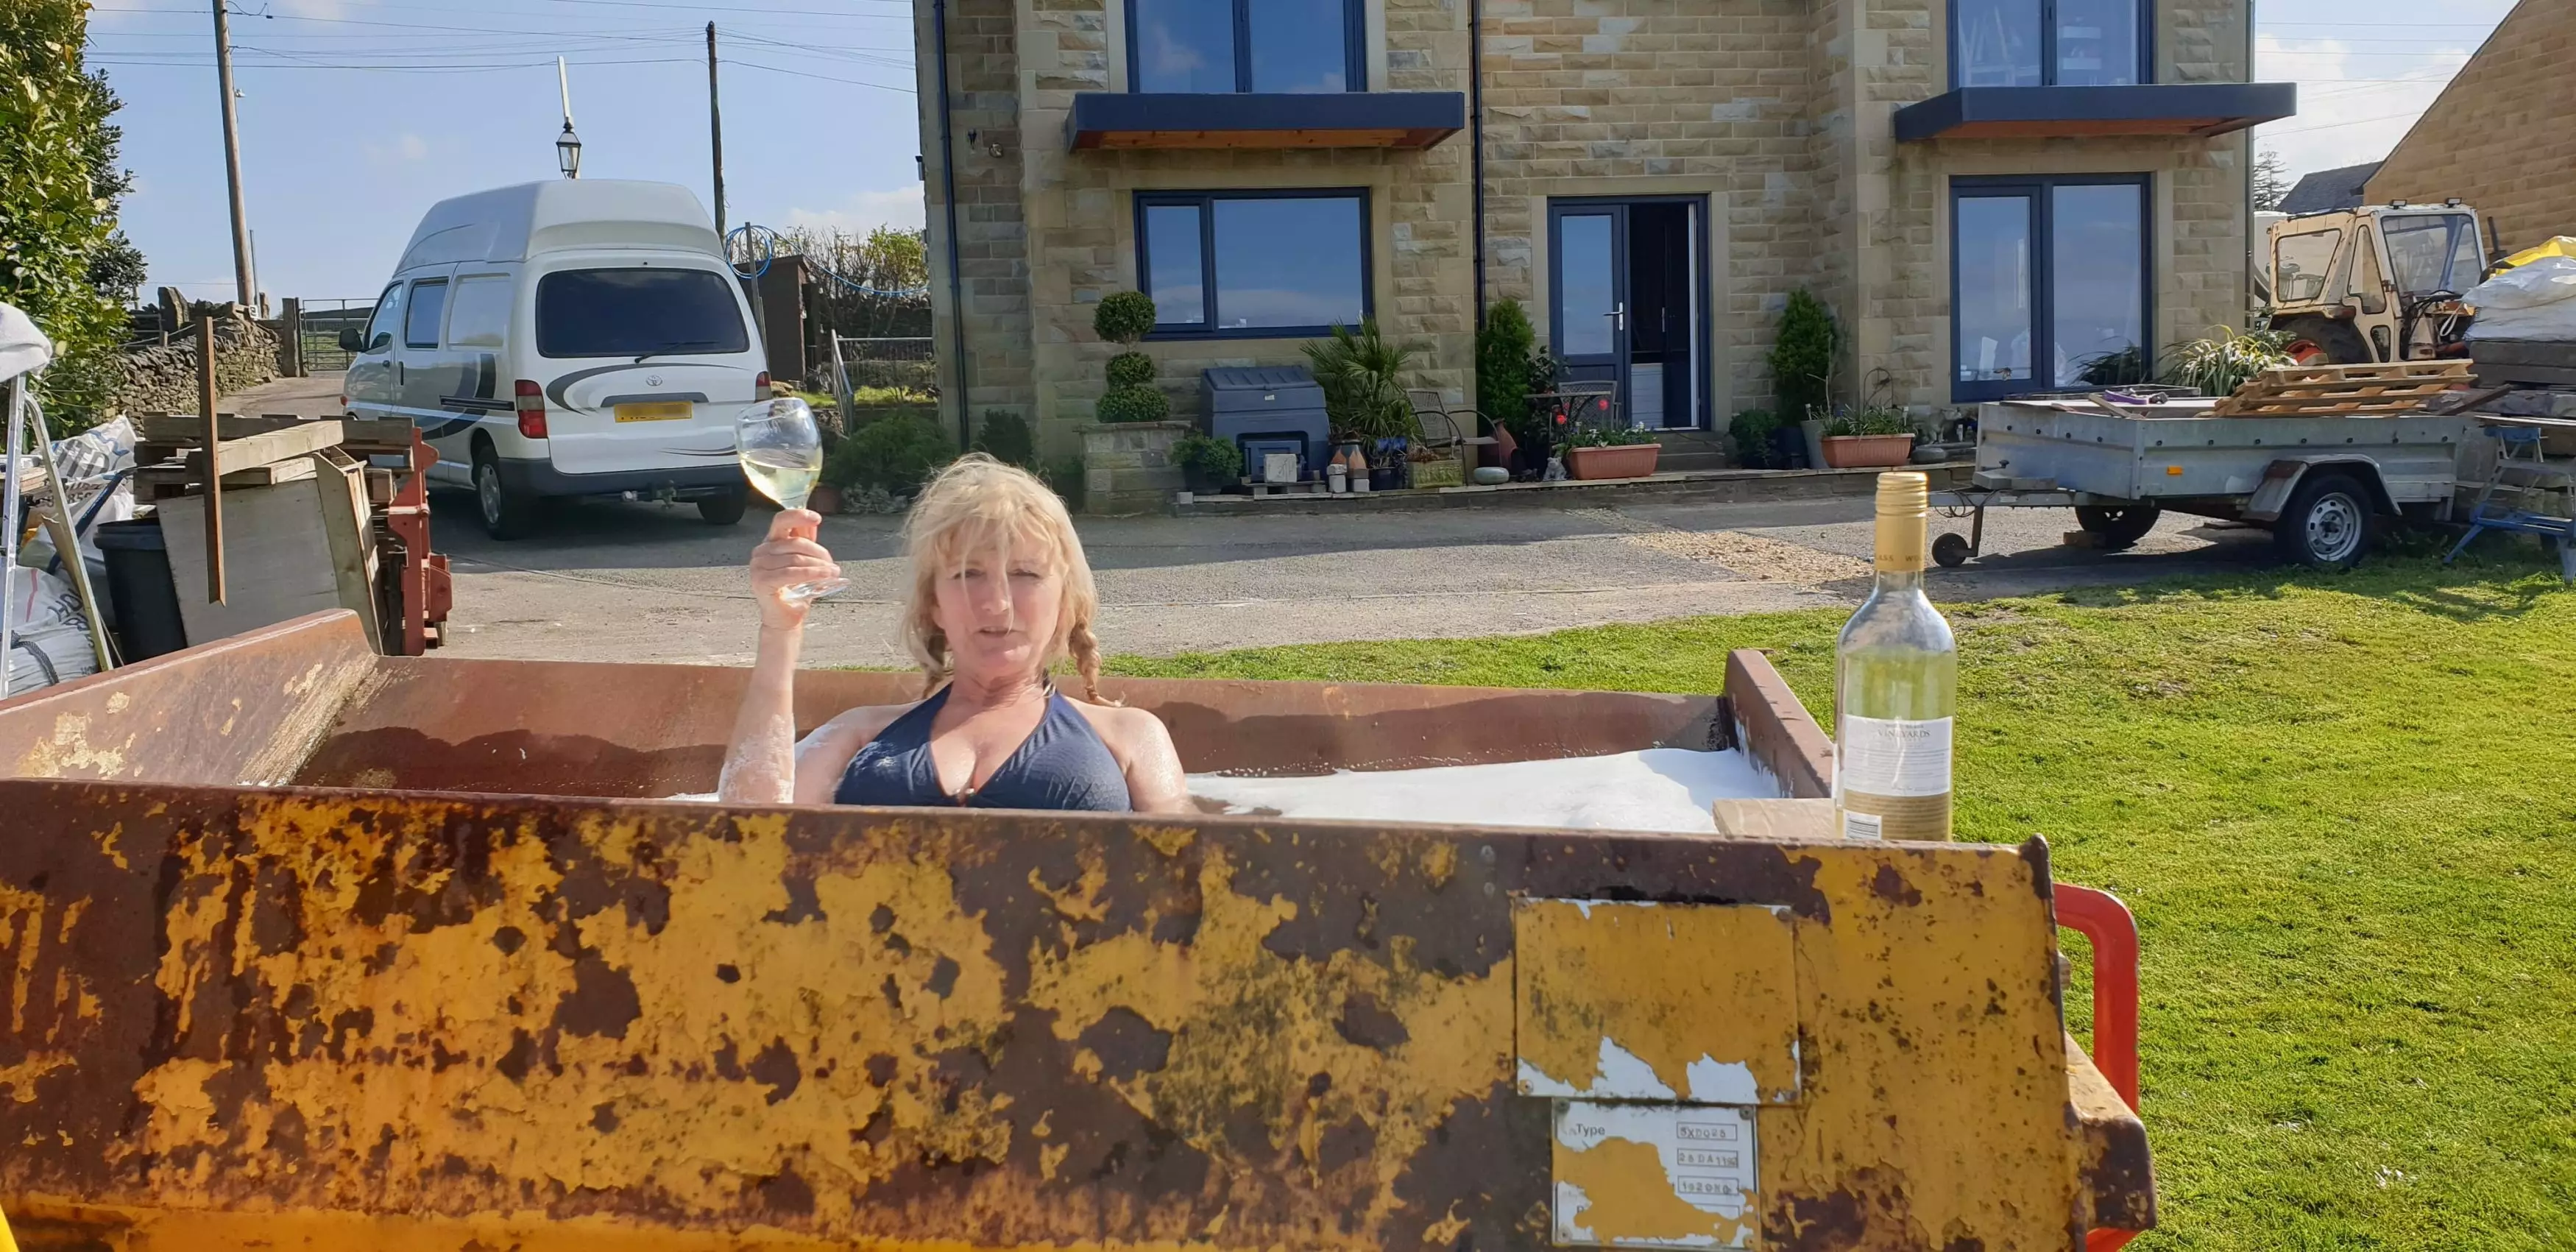 The dumper truck hot tub could become a regular feature.